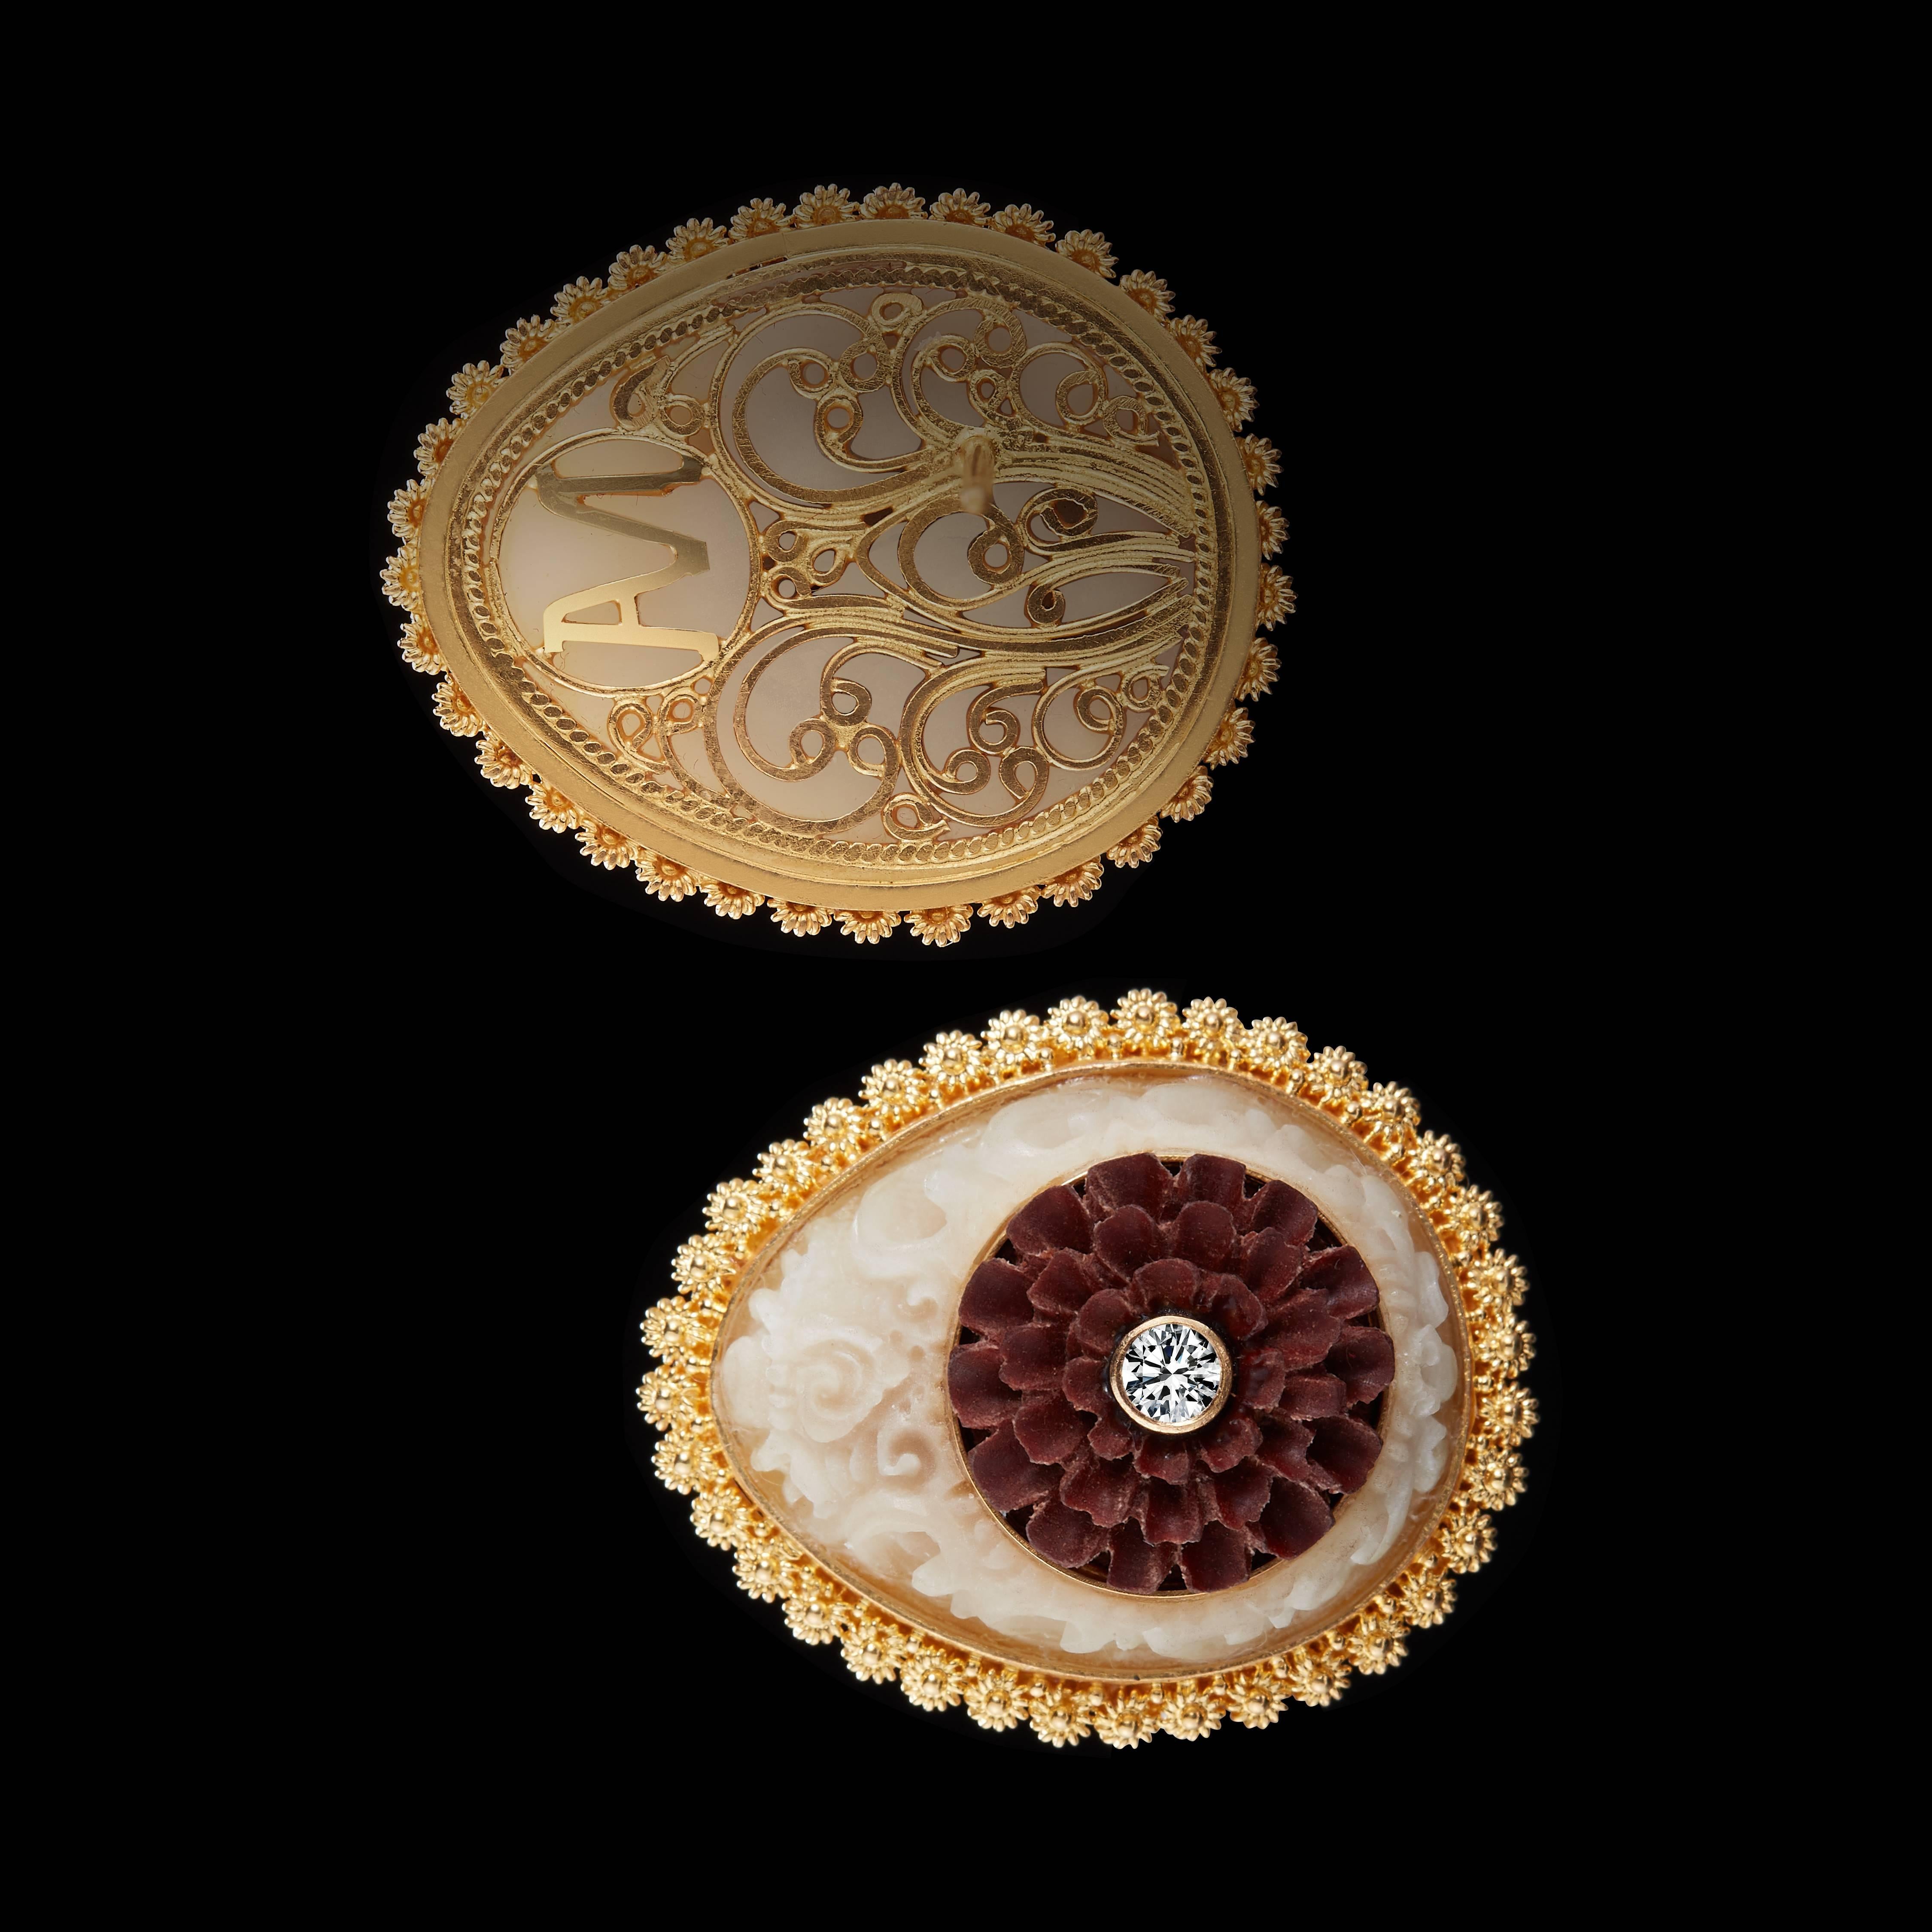 These teardrop-shaped stud earrings feature 13mm carved Sawo wood Lotus flowers accented by two Brilliant-cut Diamonds weighing .22 carats total, and are surrounded by the Balinese Kayonan, or Tree of Life motif in 17mm wild-harvested carved Tagua.